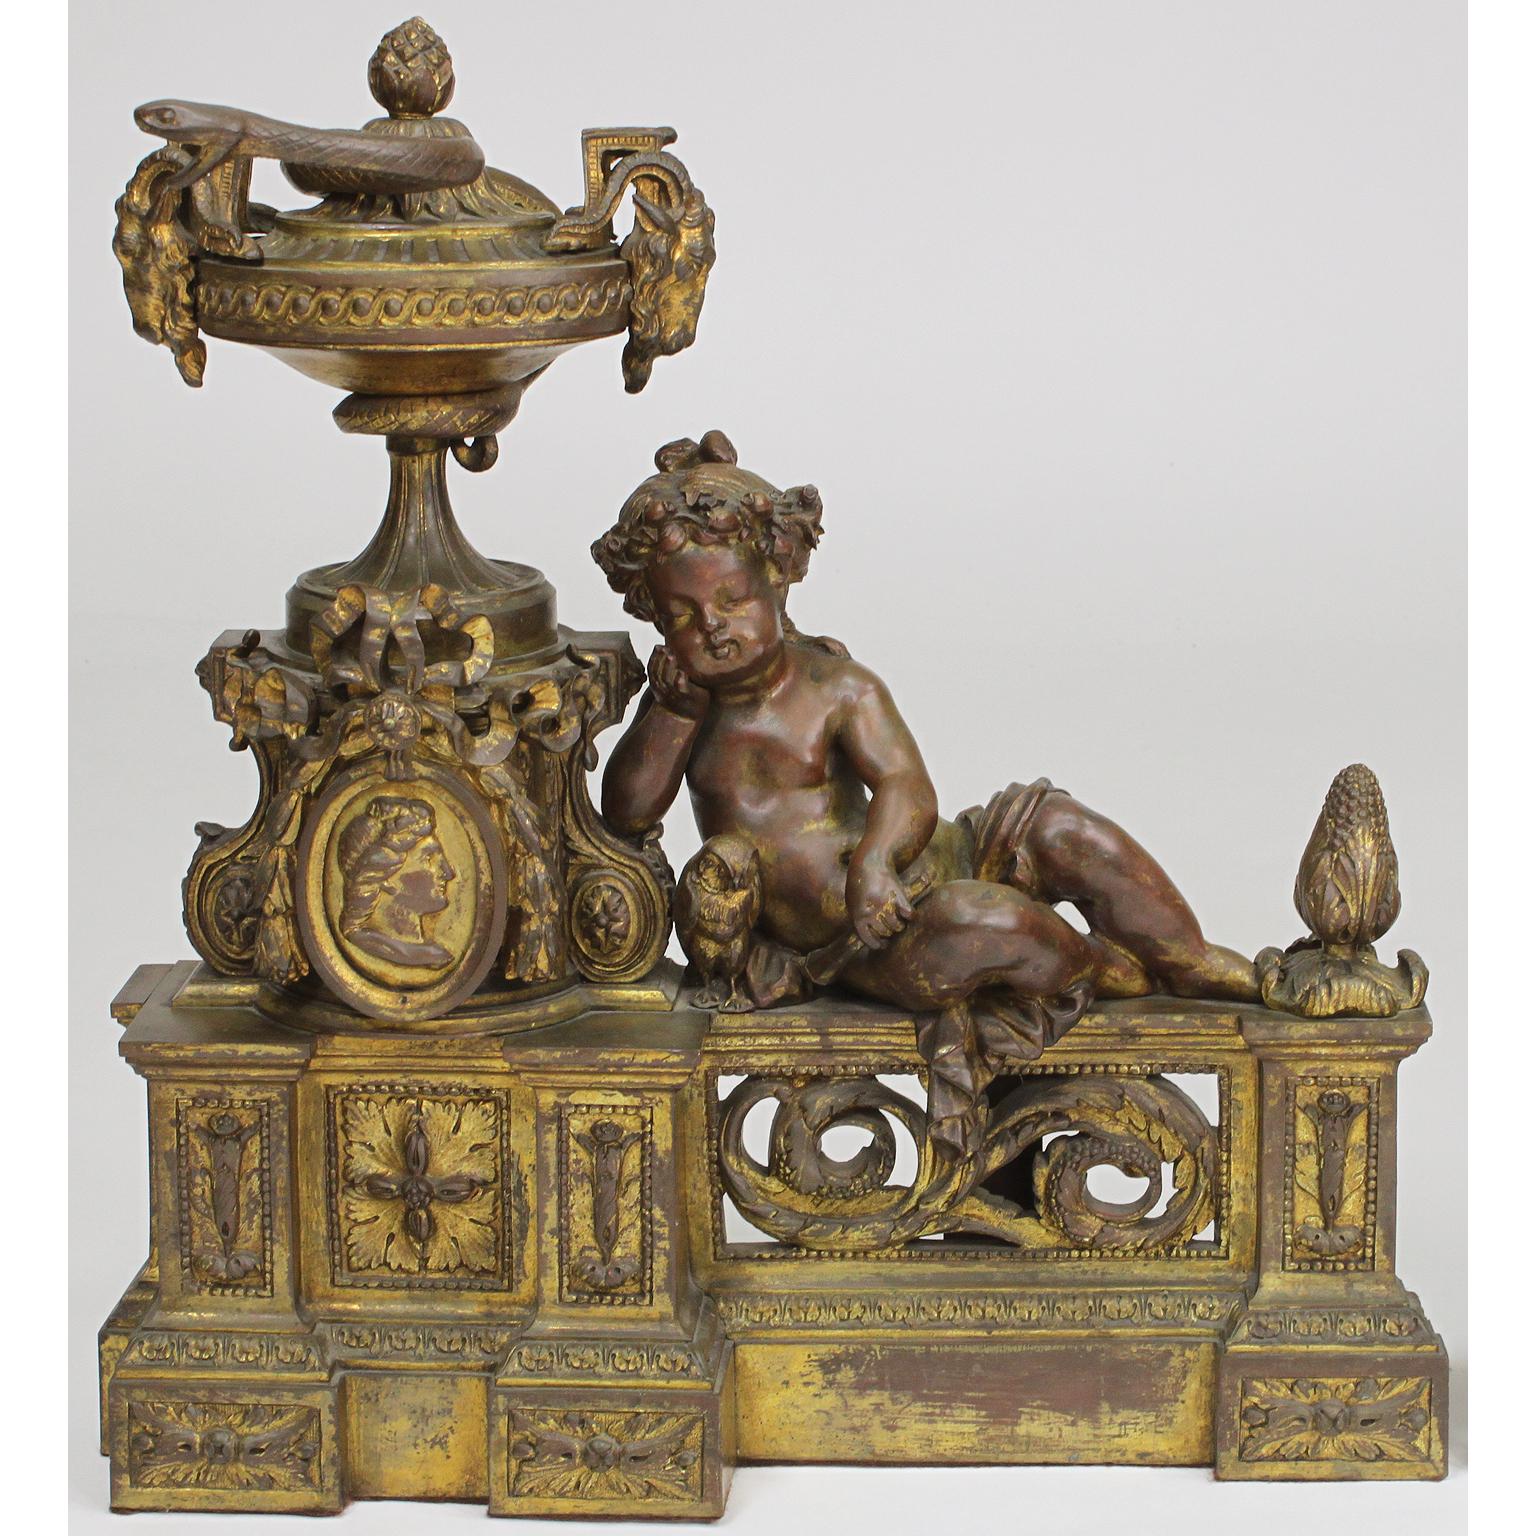 A fine pair of French 19th century Louis XV style gilt-bronze mounted figural chenets. The ornately decorated andirons, each with a figure of a resting Putto (Children) holding a torch flanked by a bird and an allegorical urn with ram-handles and